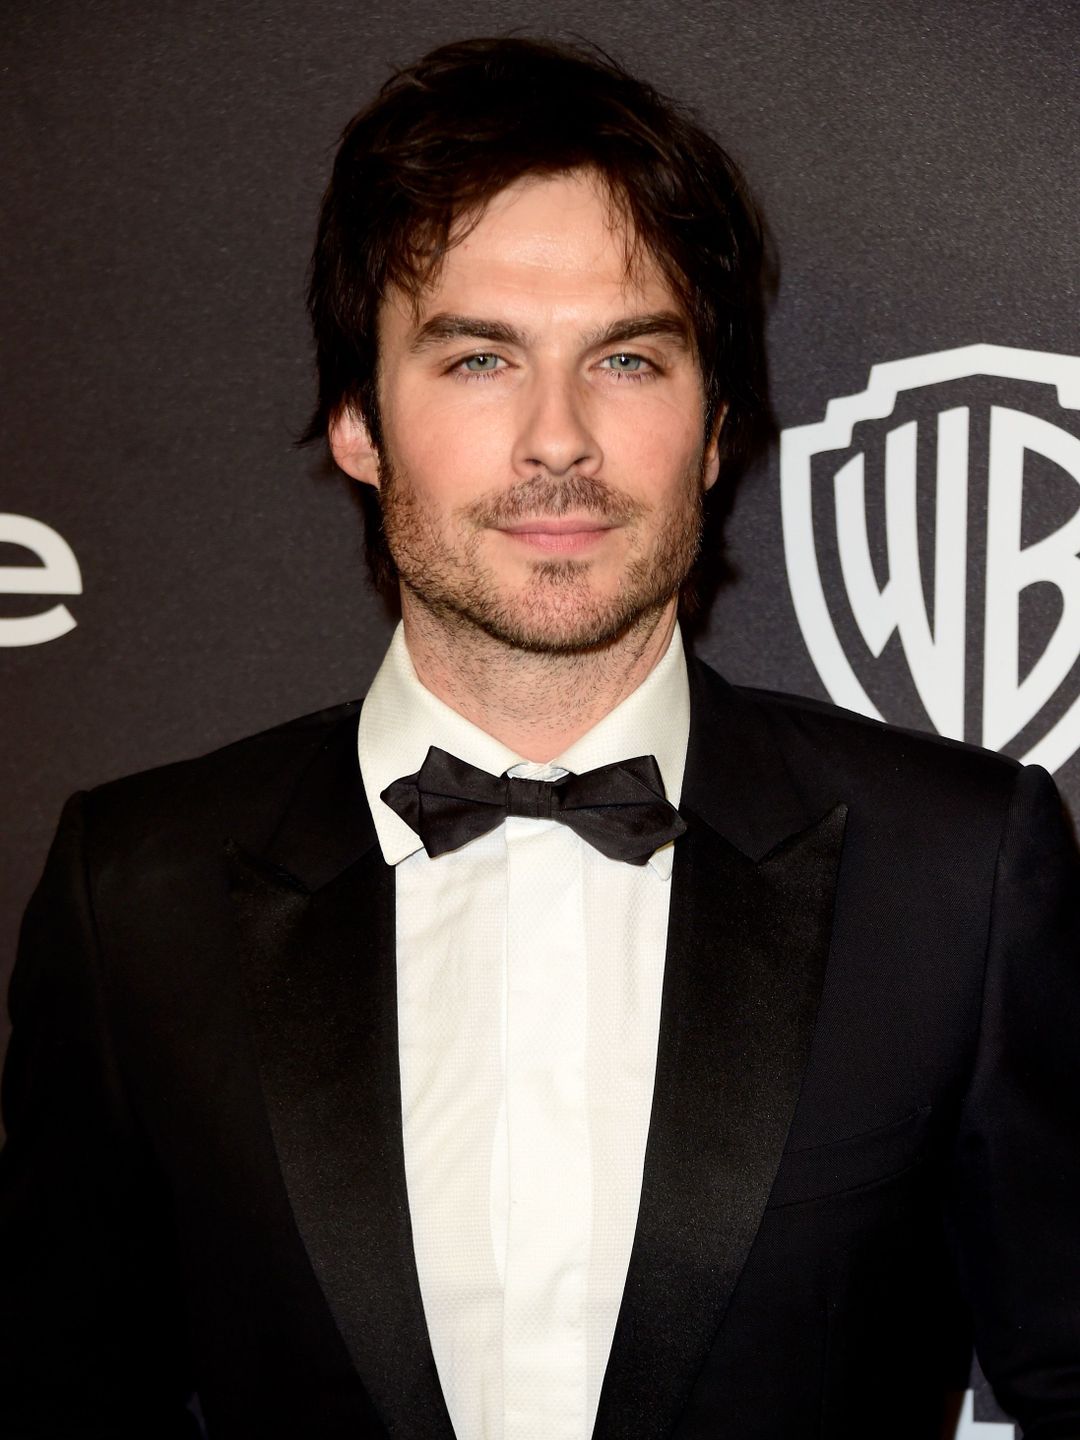 Ian Somerhalder who is his father